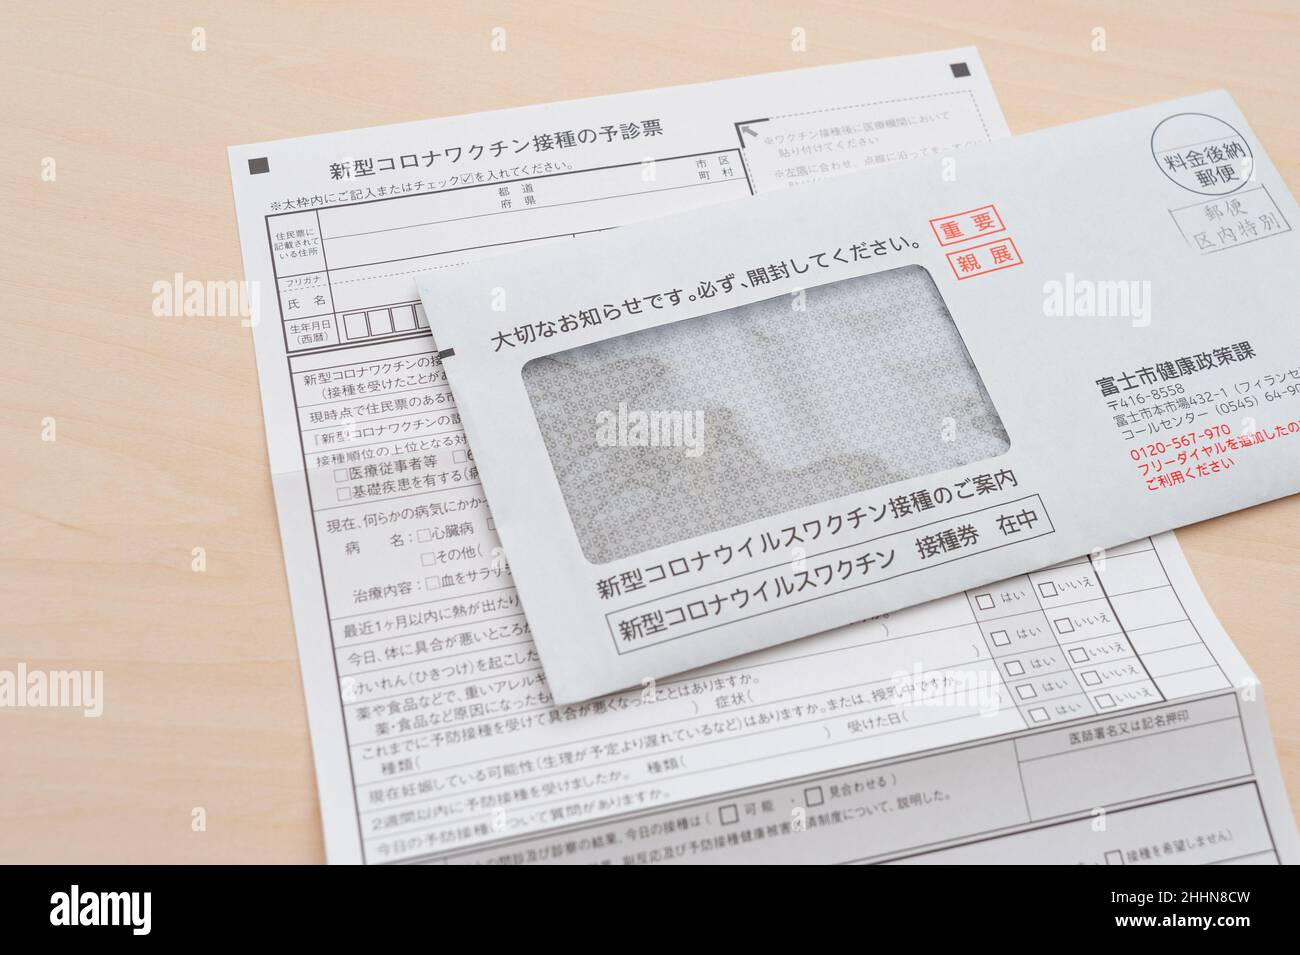 Ticket for entry to the COVID-19 vaccination site in Japan. Preliminary examination slip for New Corona vaccination Stock Photo